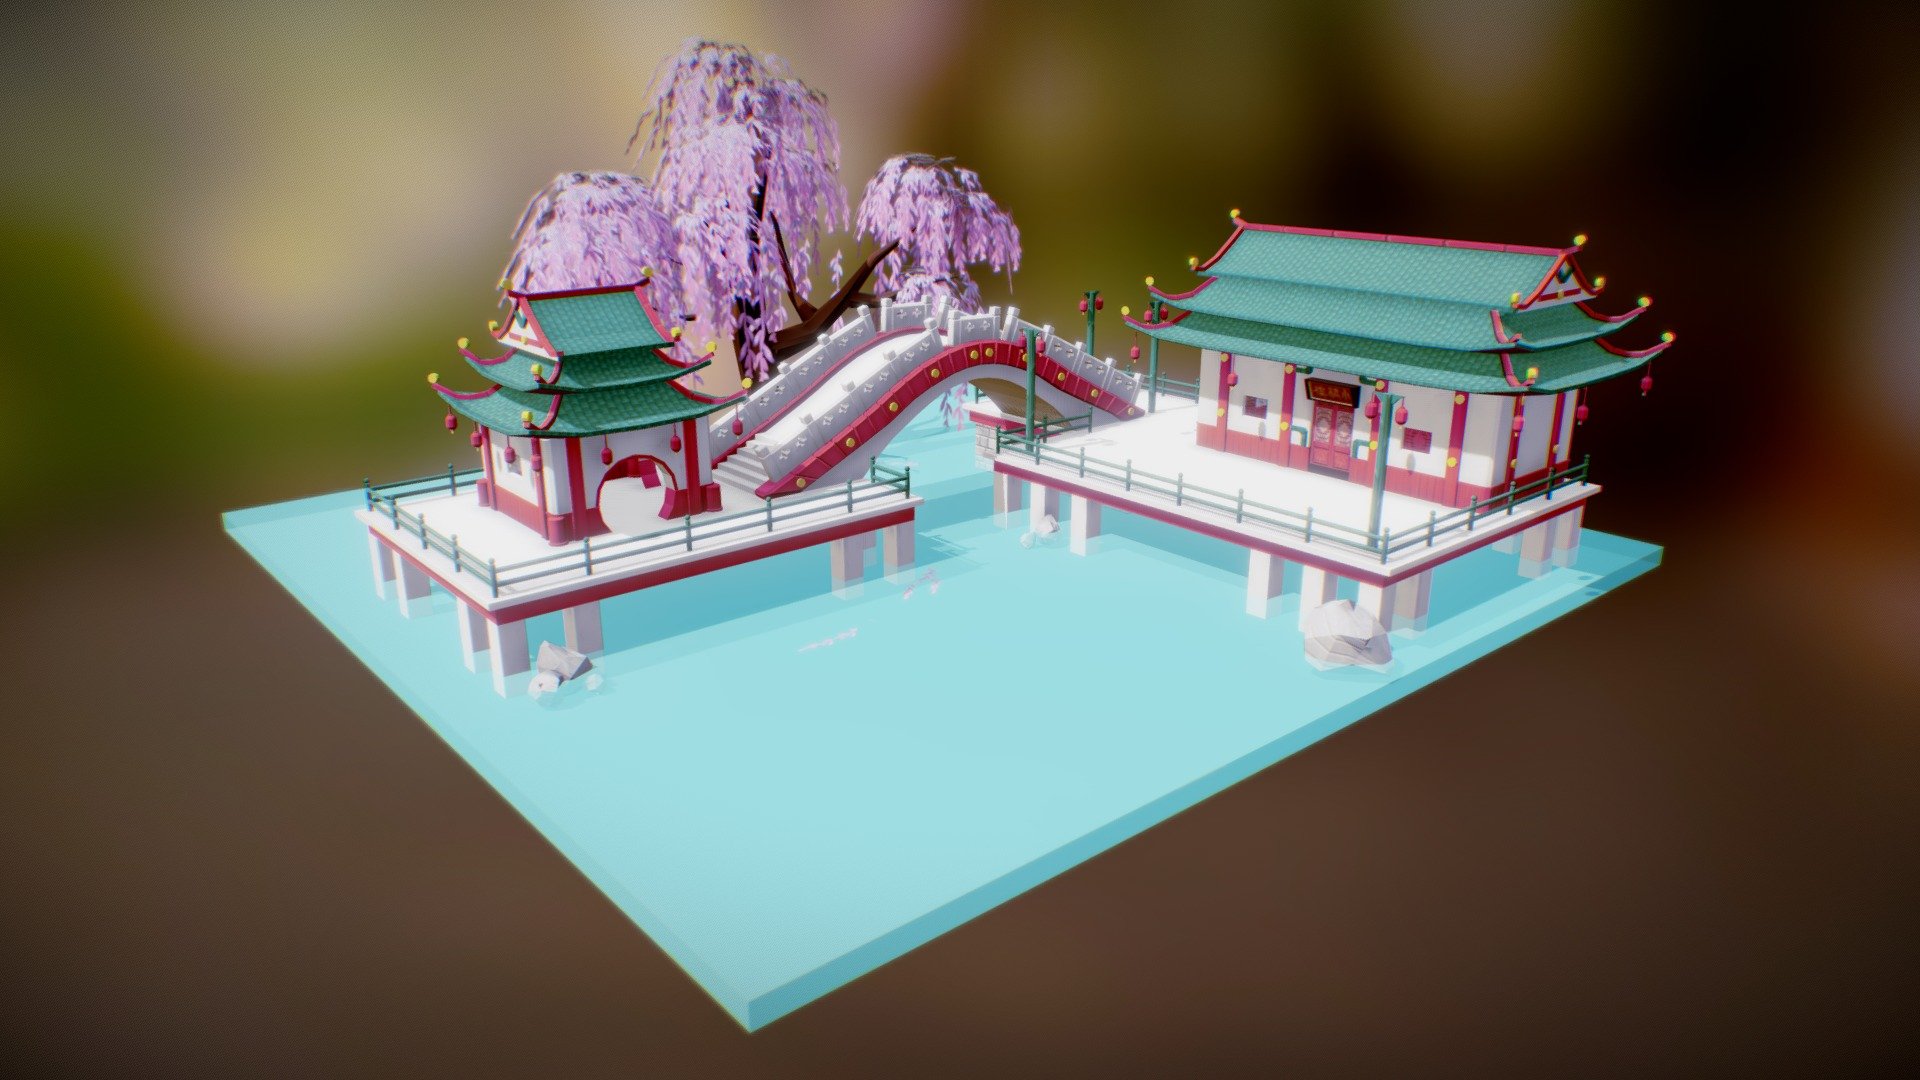 First attempt at environment scene modelling 3d model